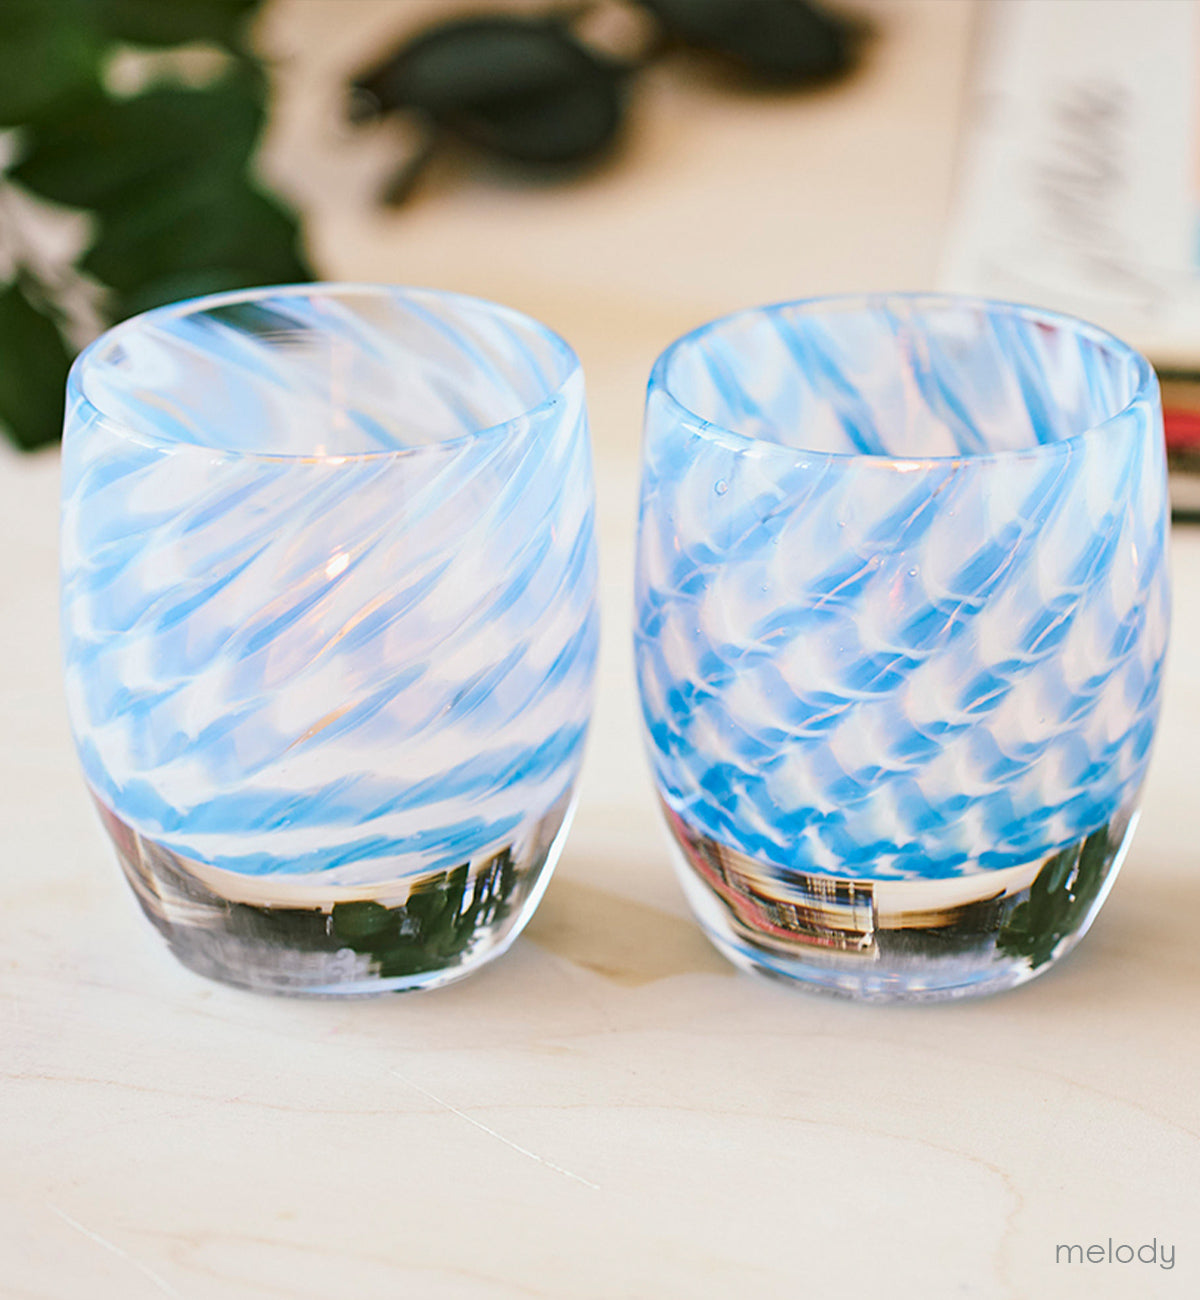 two melody, sweeping swirled blue and white hand-blown glass votive candle holders on a light wood table with green plant and sunglasses in background.